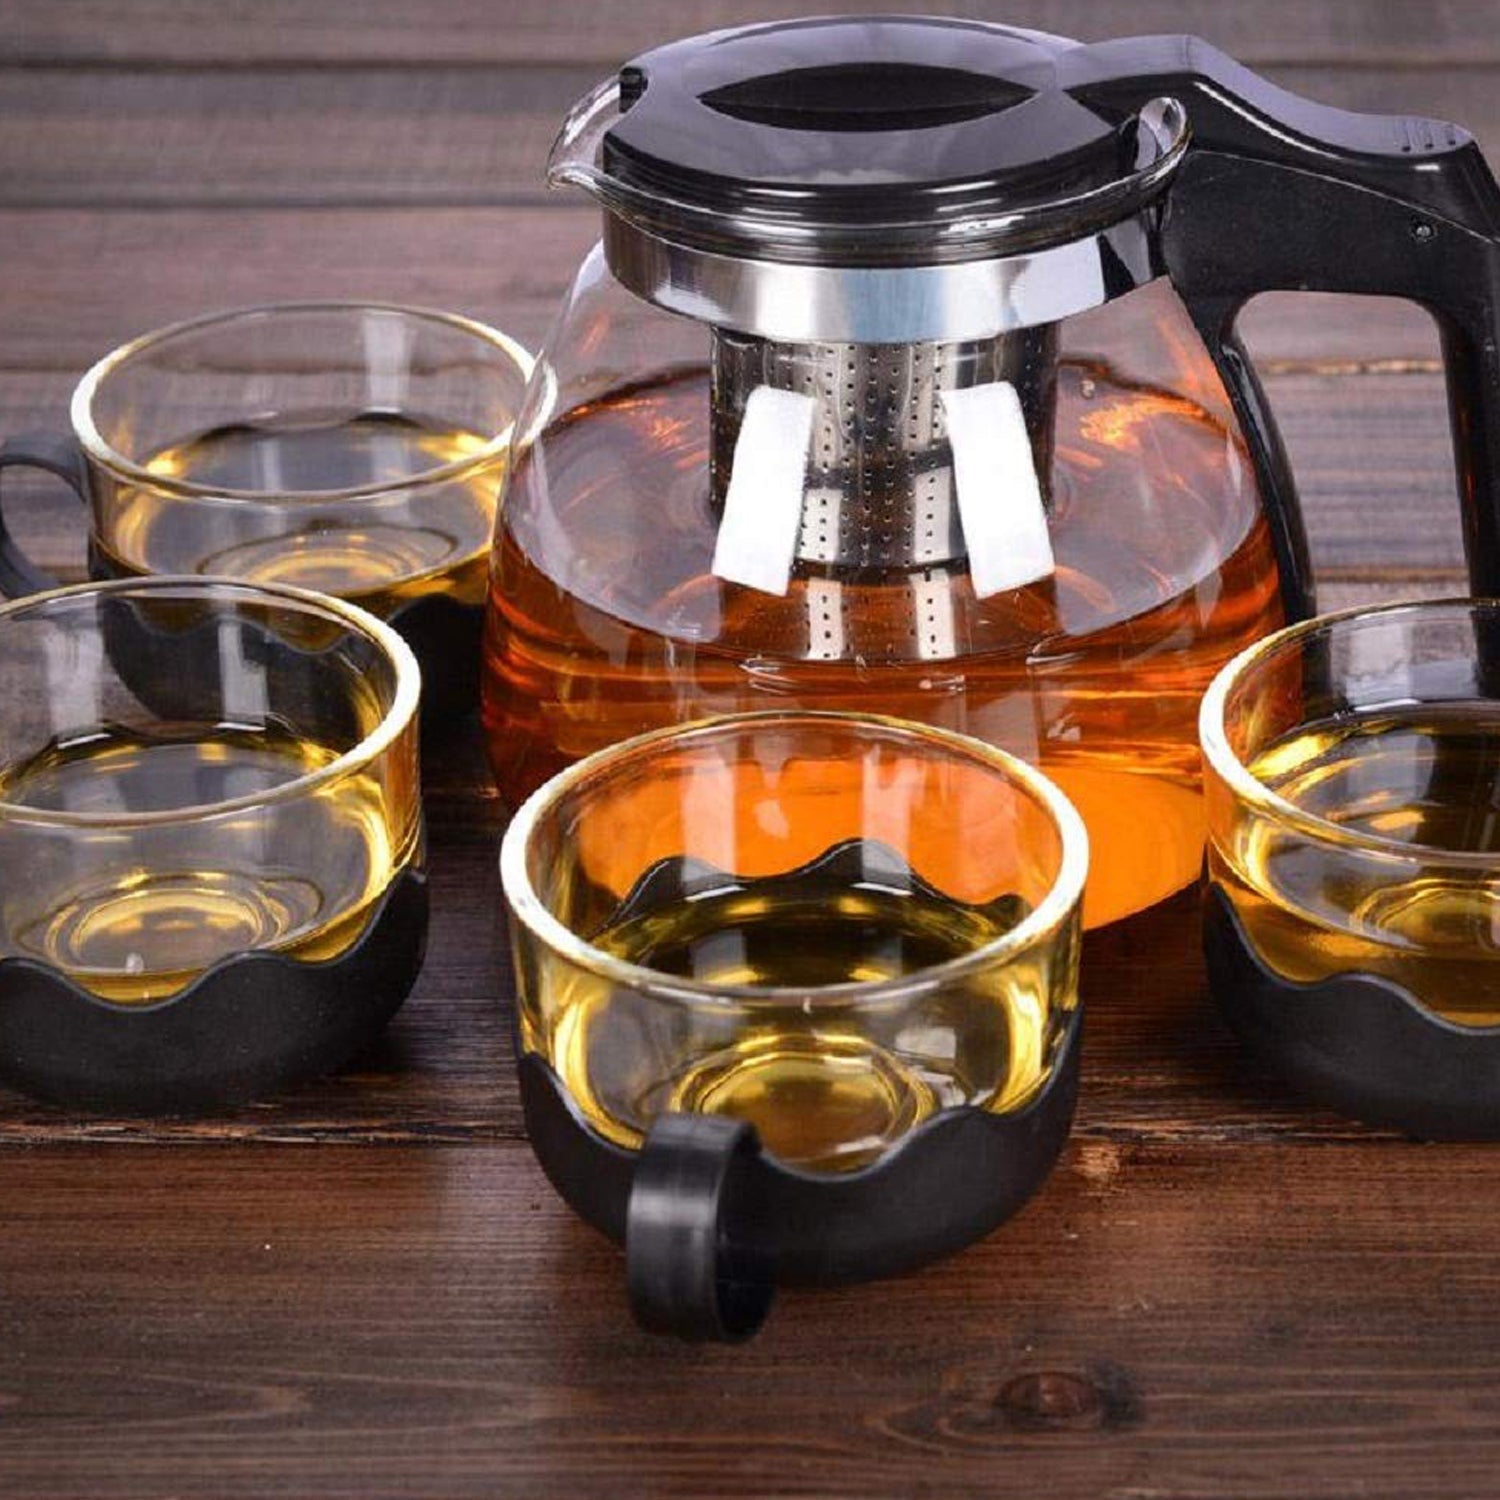 5886 Flame Proof Glass Kettle & Cup  Set With Stainer High Quality Kettle Set For Home & Cafe Use  (4 Cup & 1 Kettle)